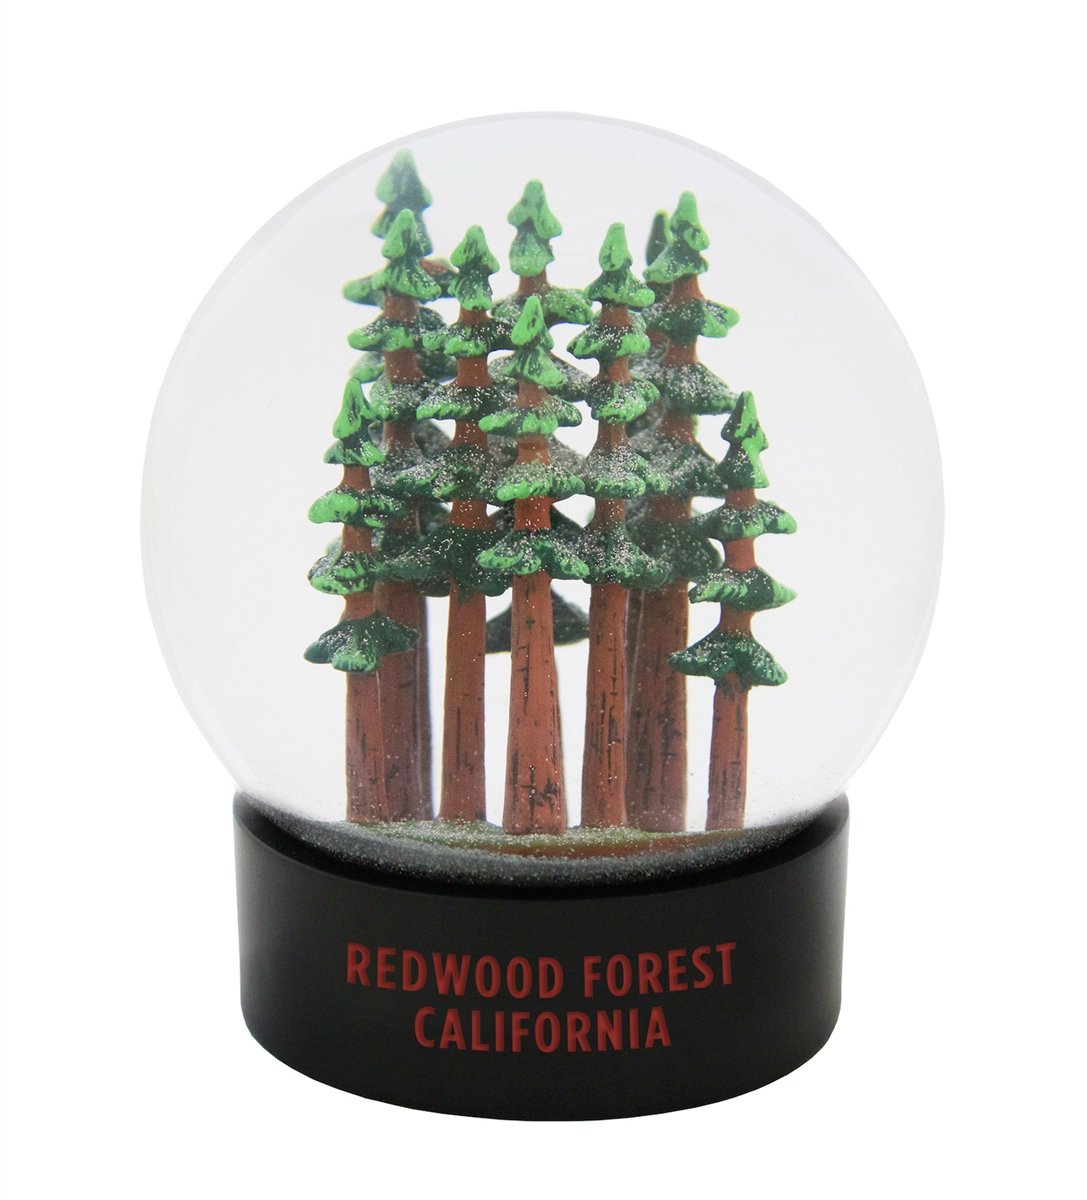 California Redwood Forest Fog Globe, designed and produced by the Golden Gate National Parks Conservancy.